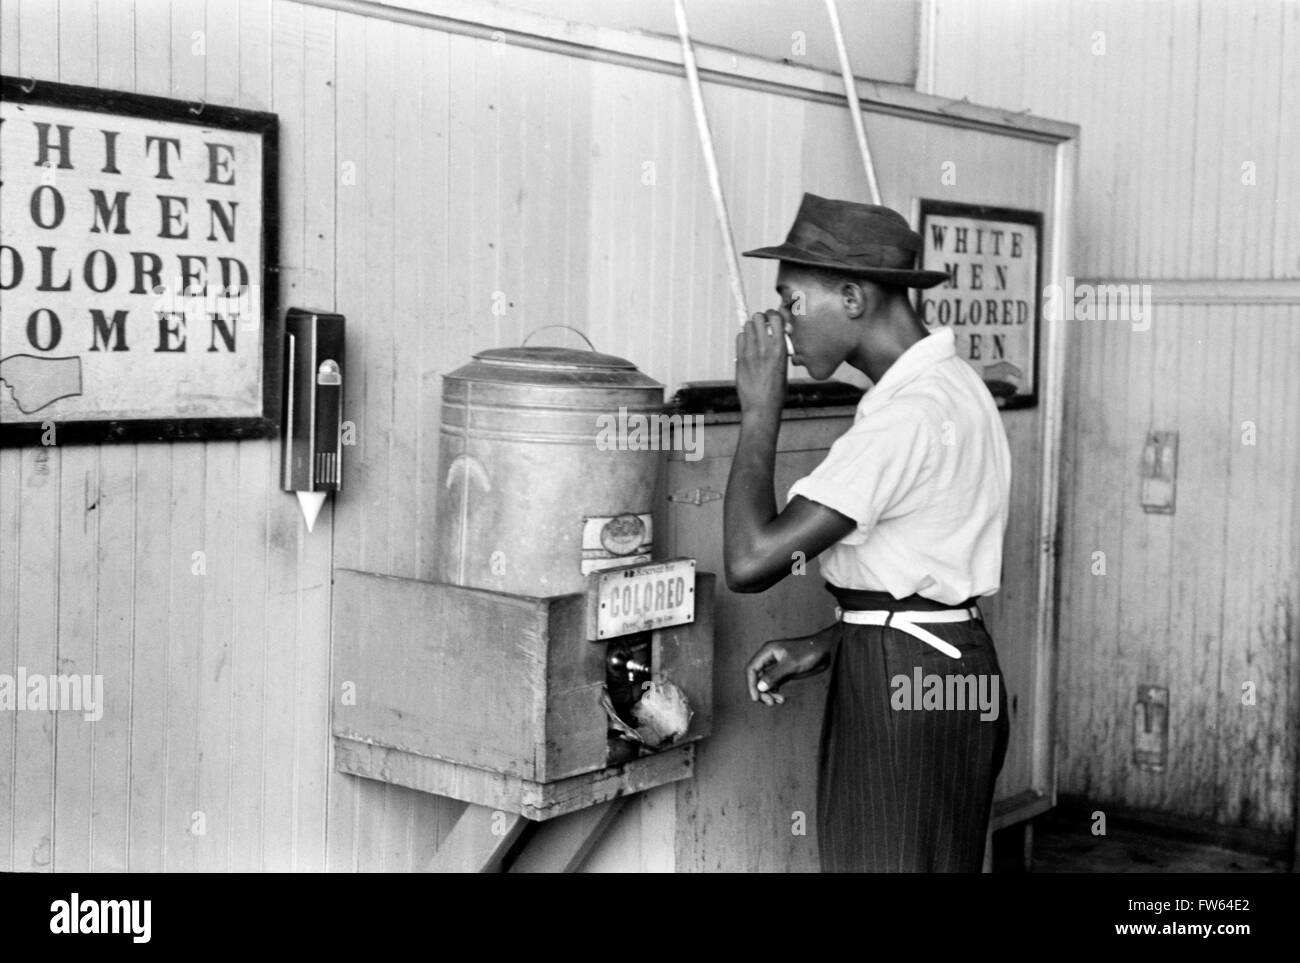 Segregation, USA. Black man drinking at a water cooler with a 'Colored' sign below, Streetcar Terminal, Oklahoma City, Oklahoma, USA. Photo by Russell Lee, 1939. Stock Photo